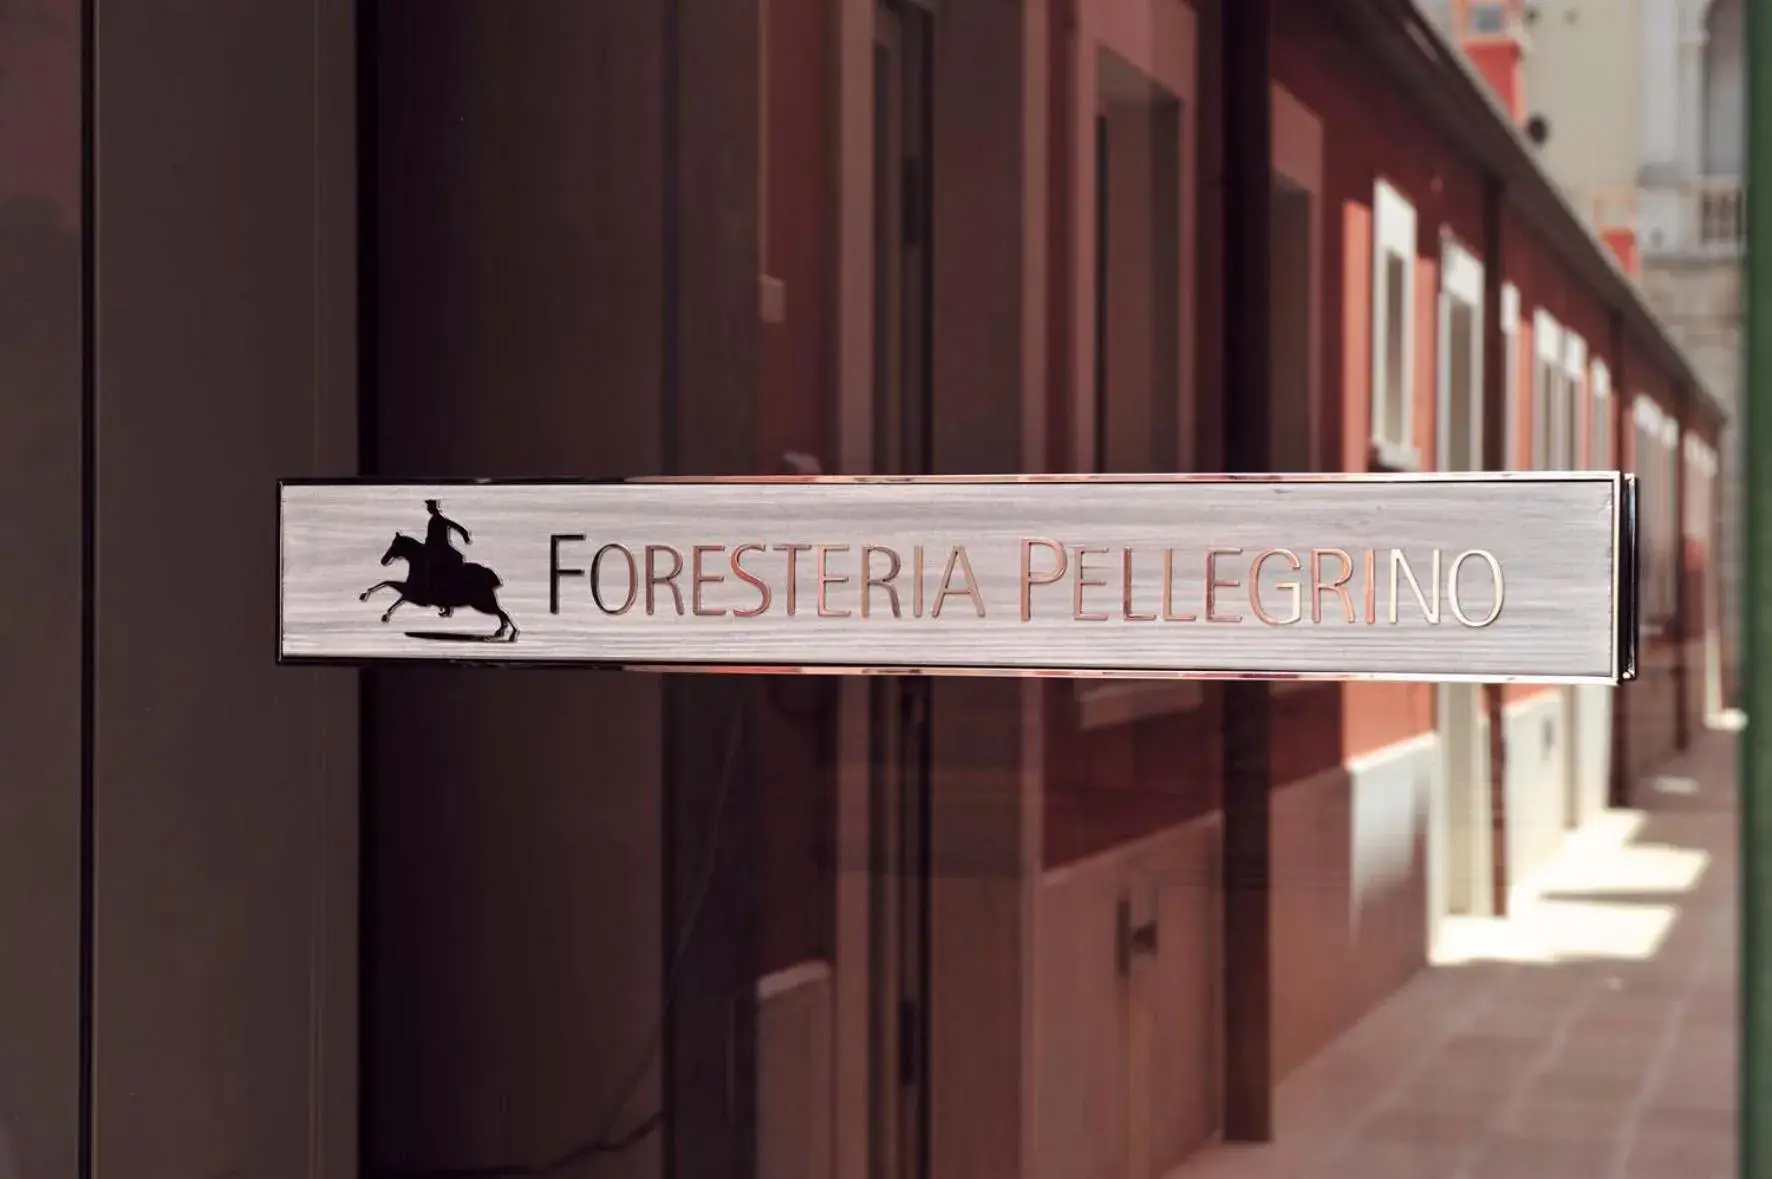 Property logo or sign in Foresteria Pellegrino